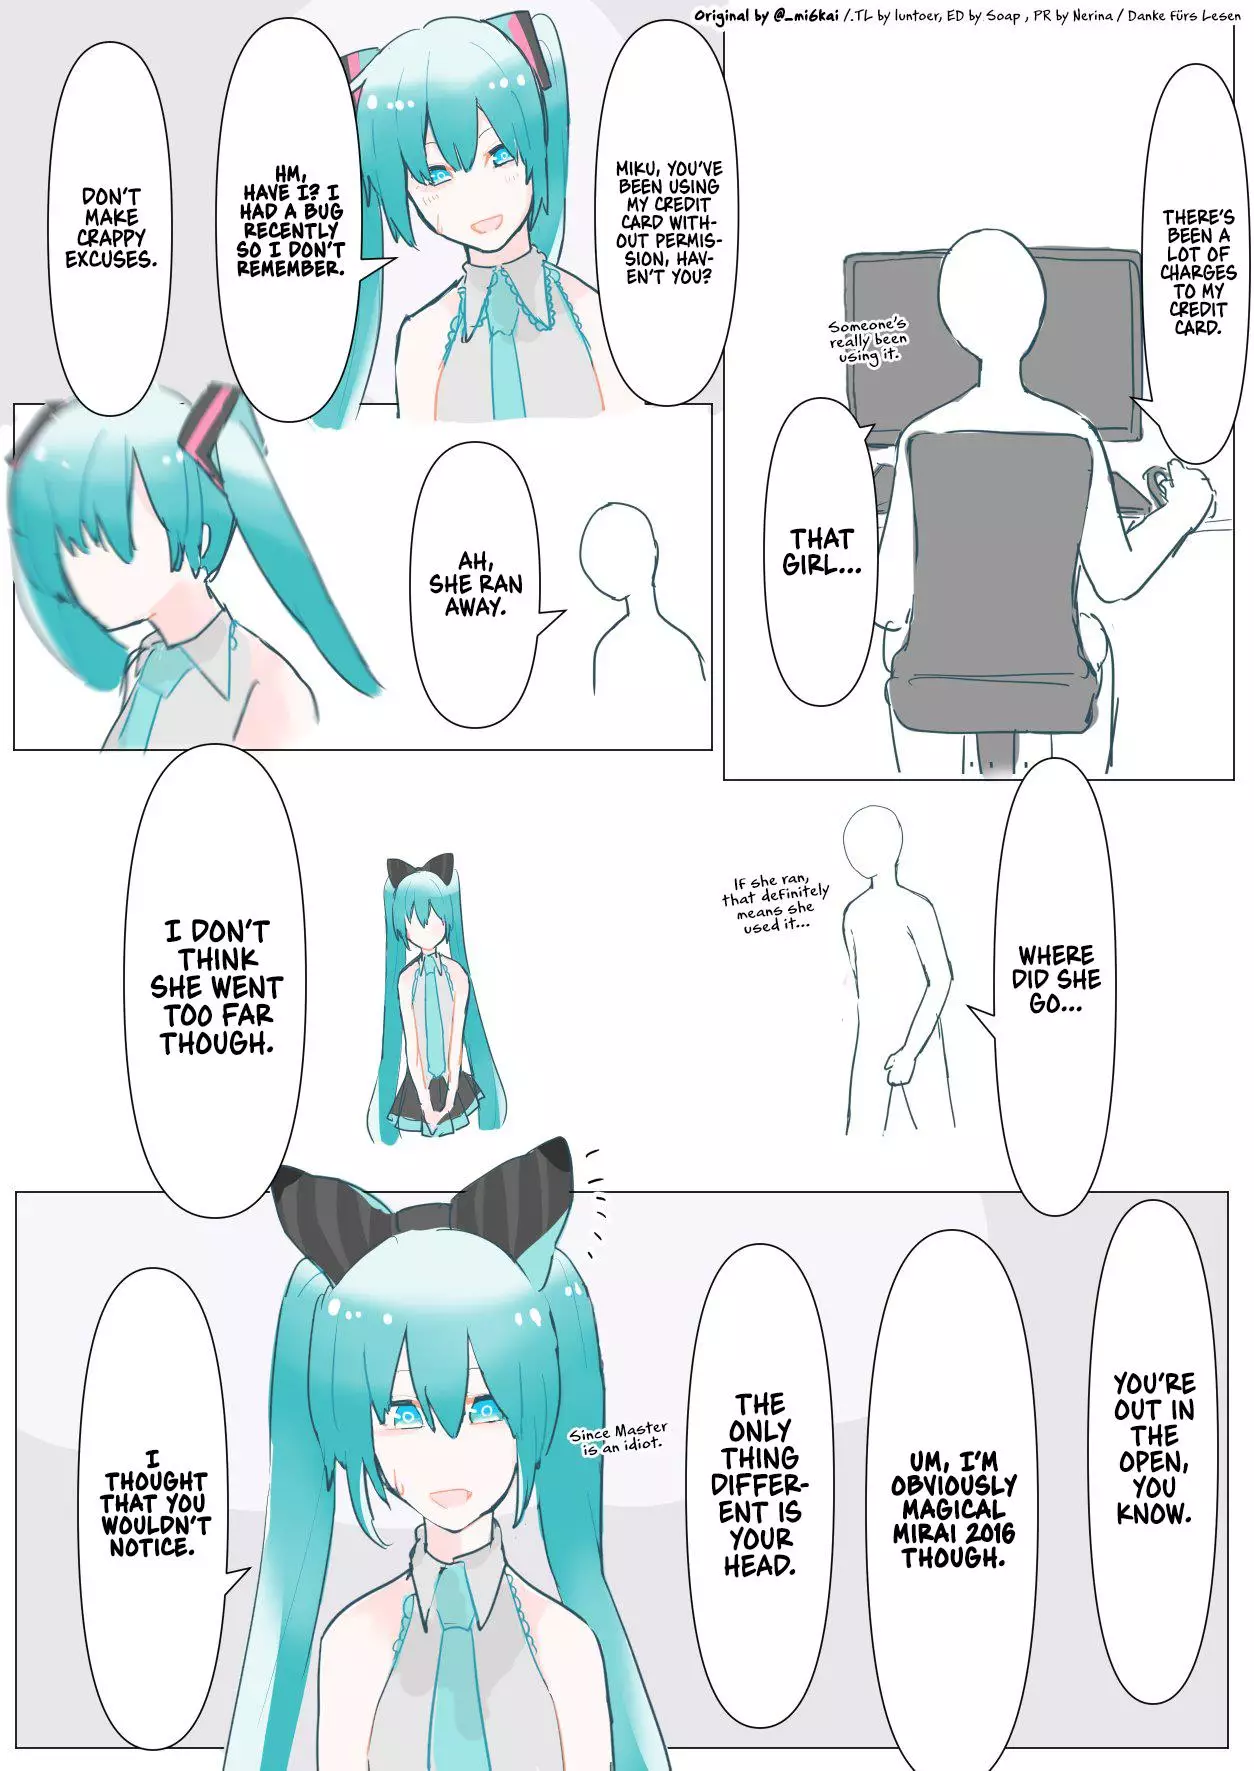 The Daily Life Of Master & Hatsune Miku - 34 page 1-daaf400f